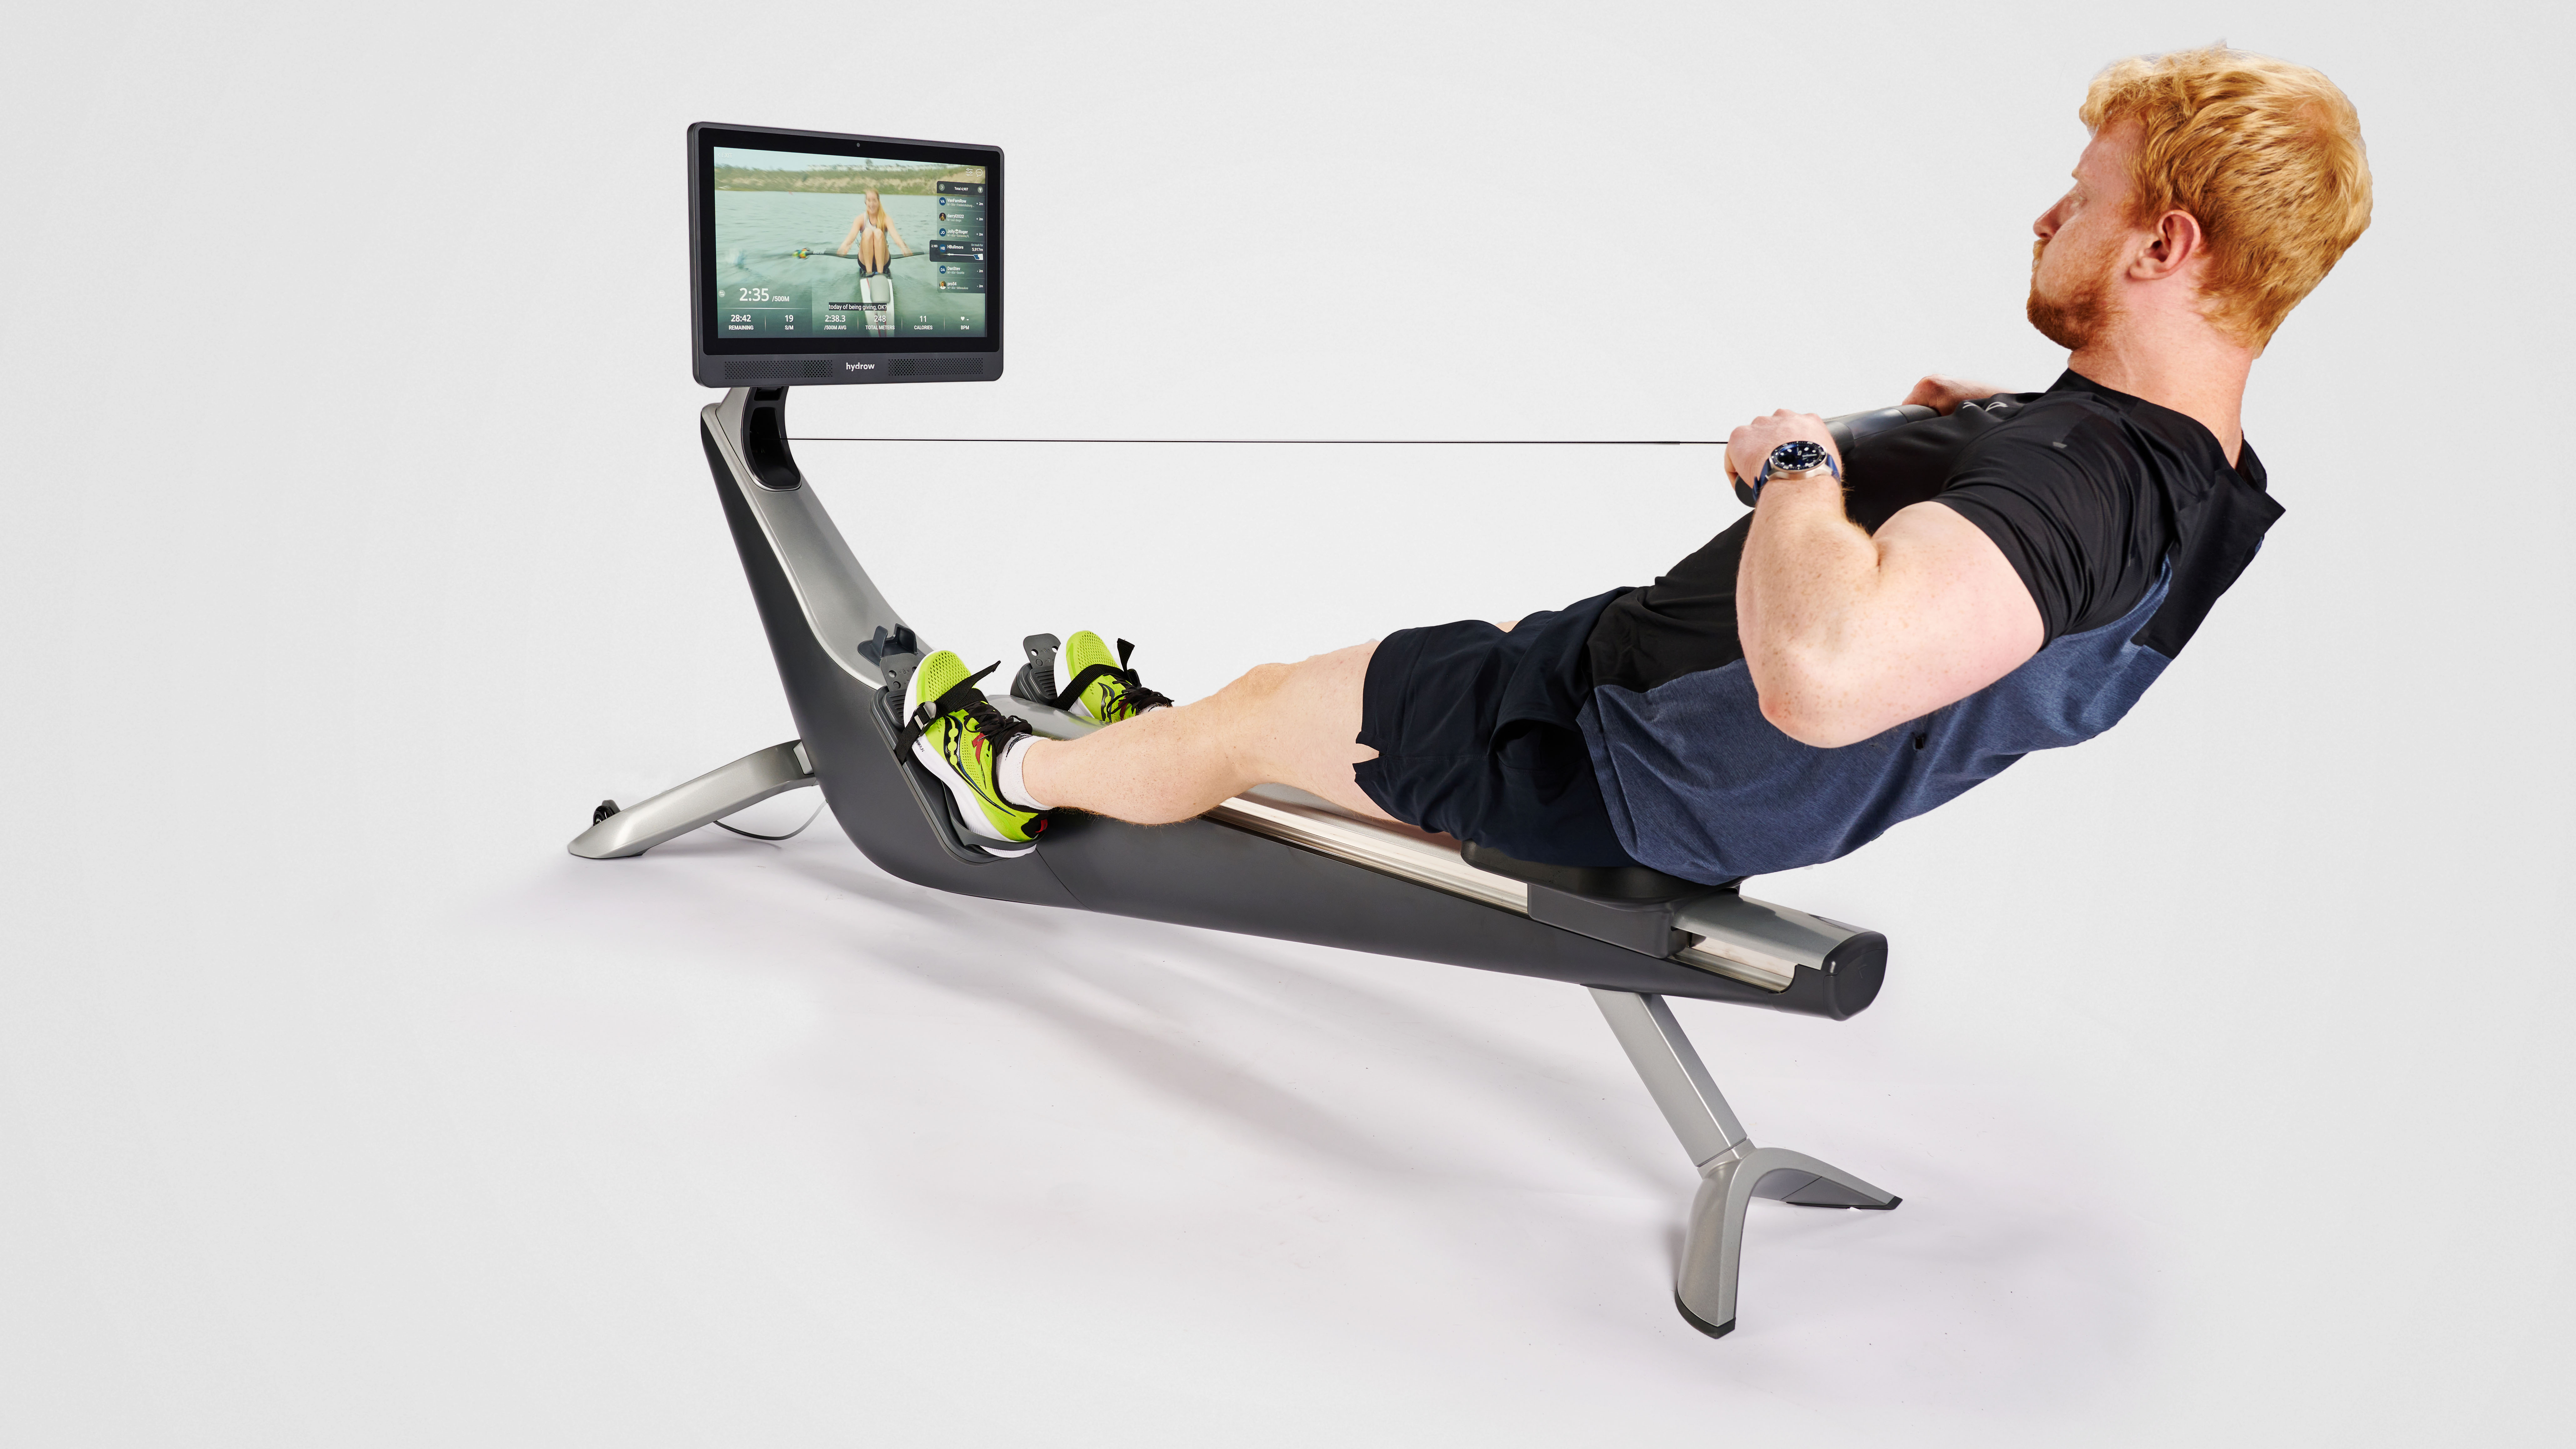 Live Science fitness writertests out the Hydrow rowing machine